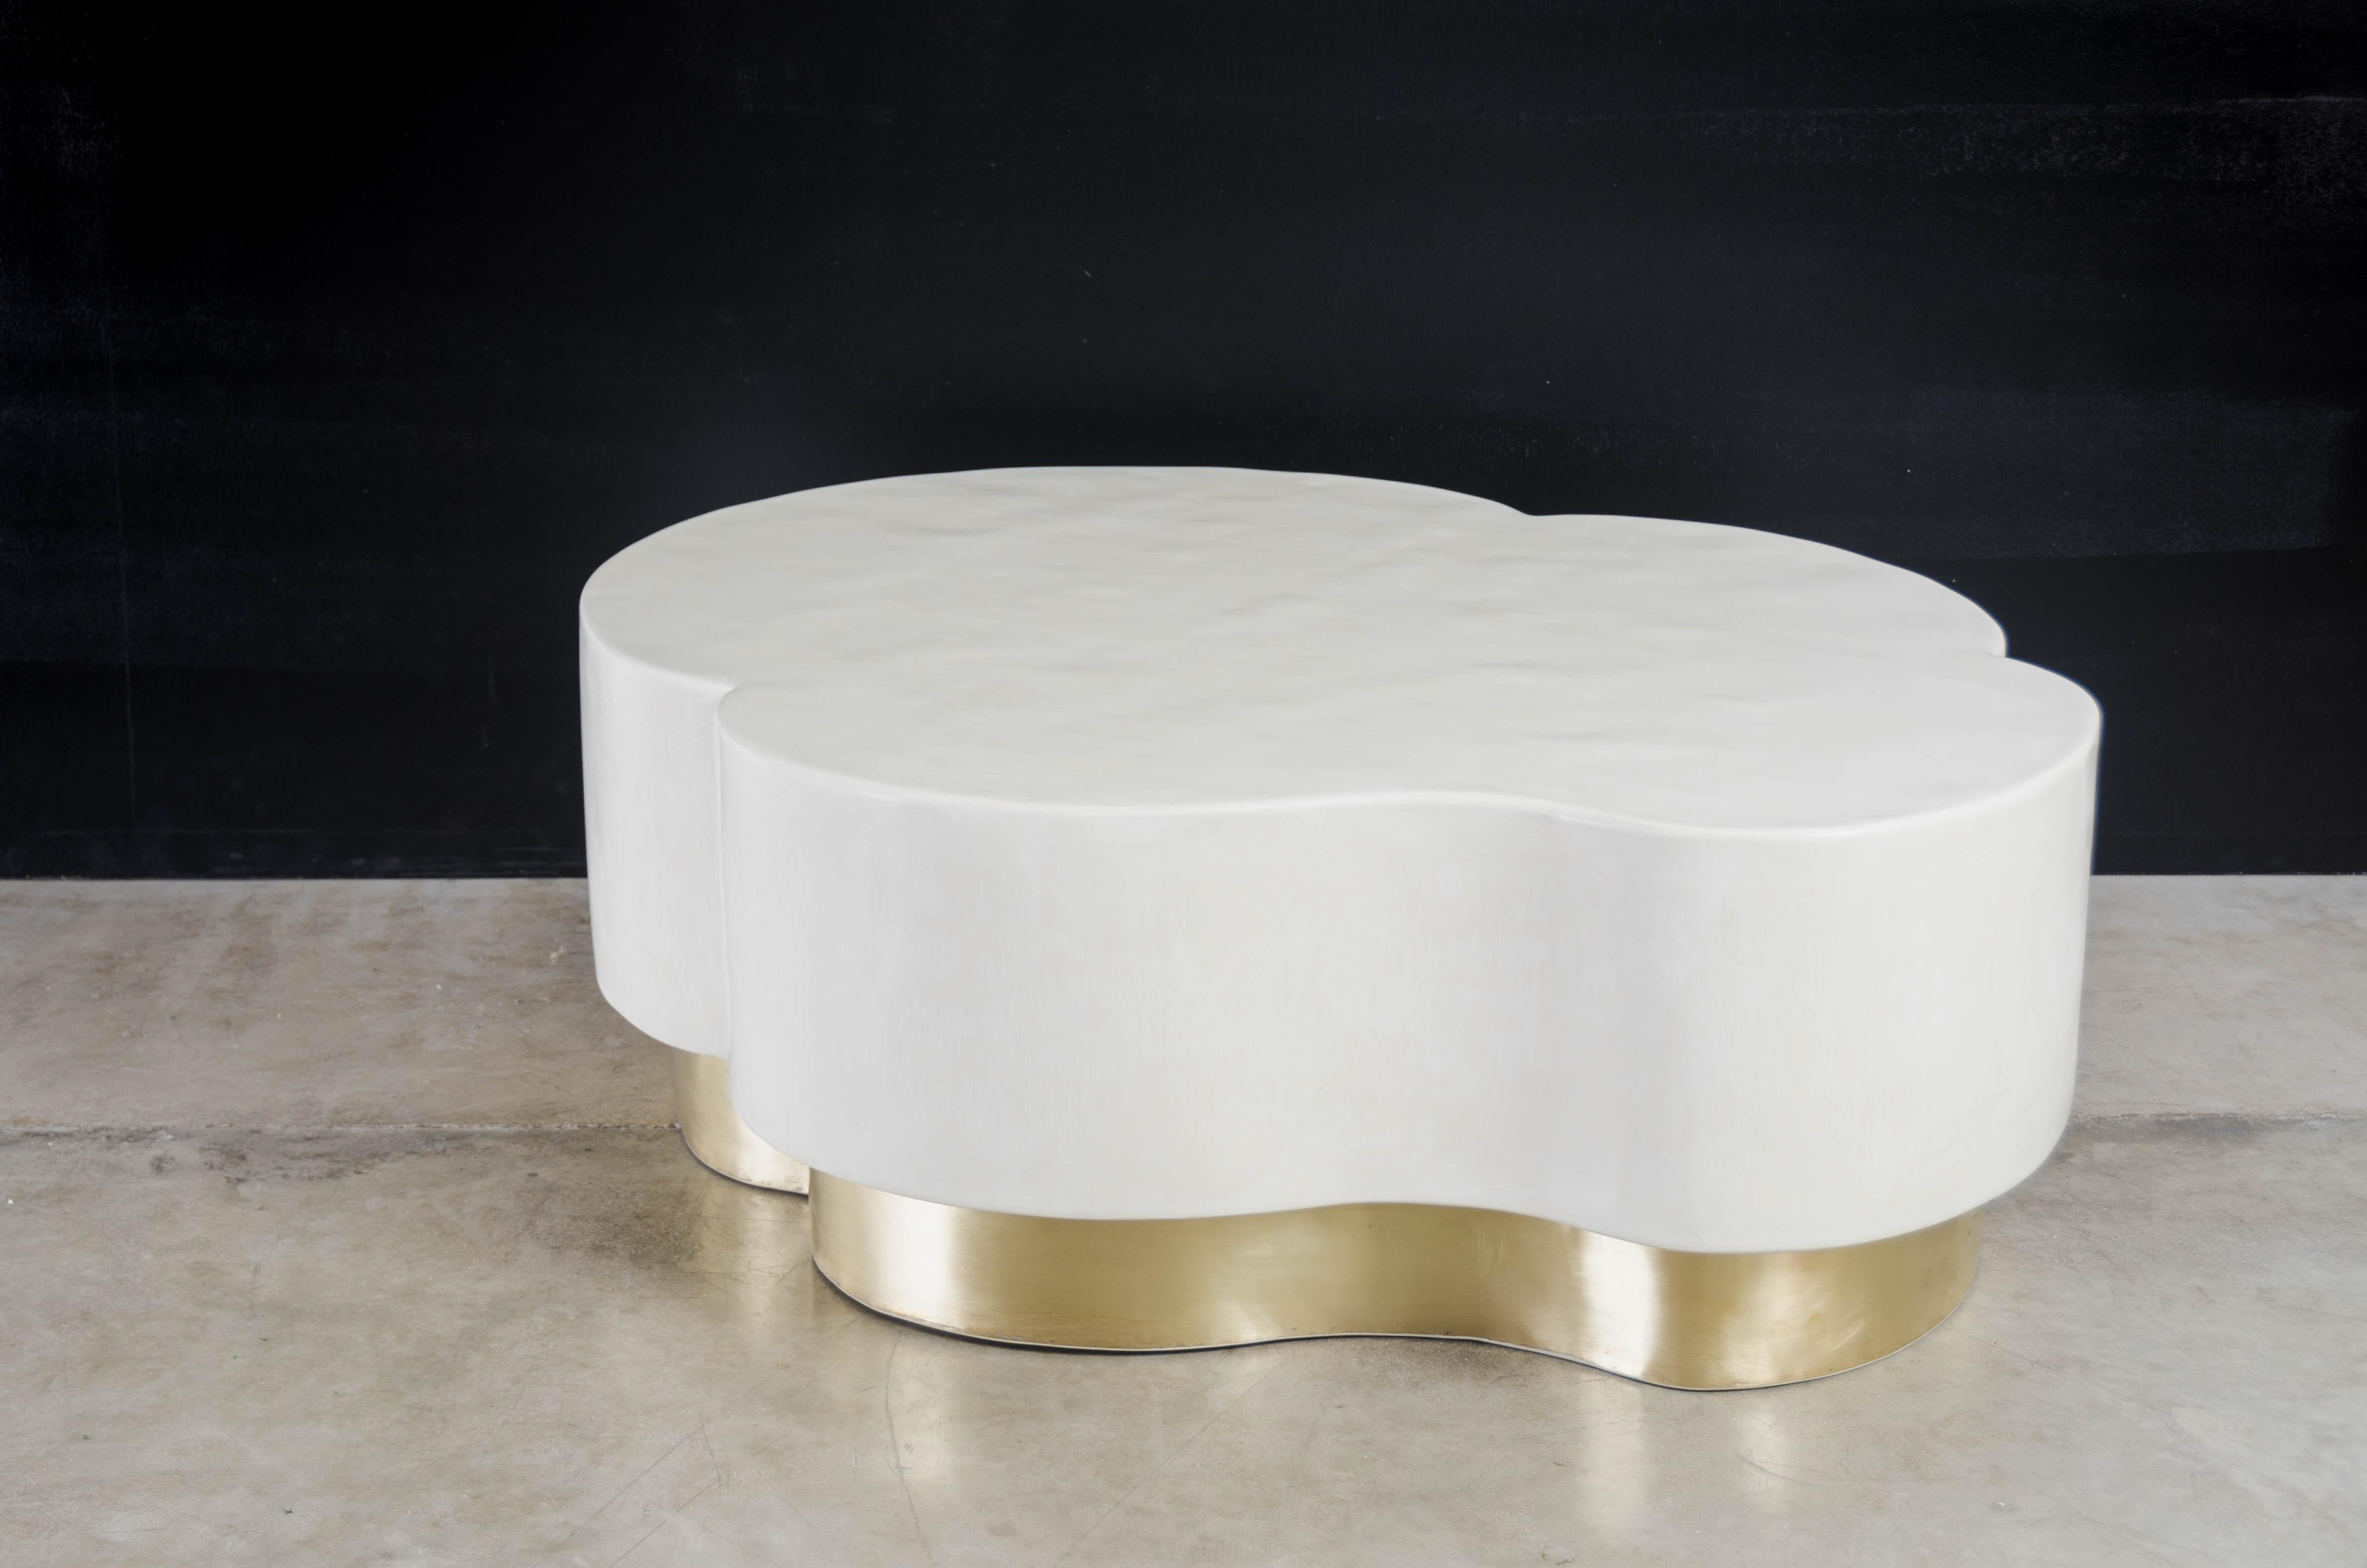 Lacquered Contemporary Leaf Design Cocktail Table in Cream Lacquer w/ Brass by Robert Kuo For Sale